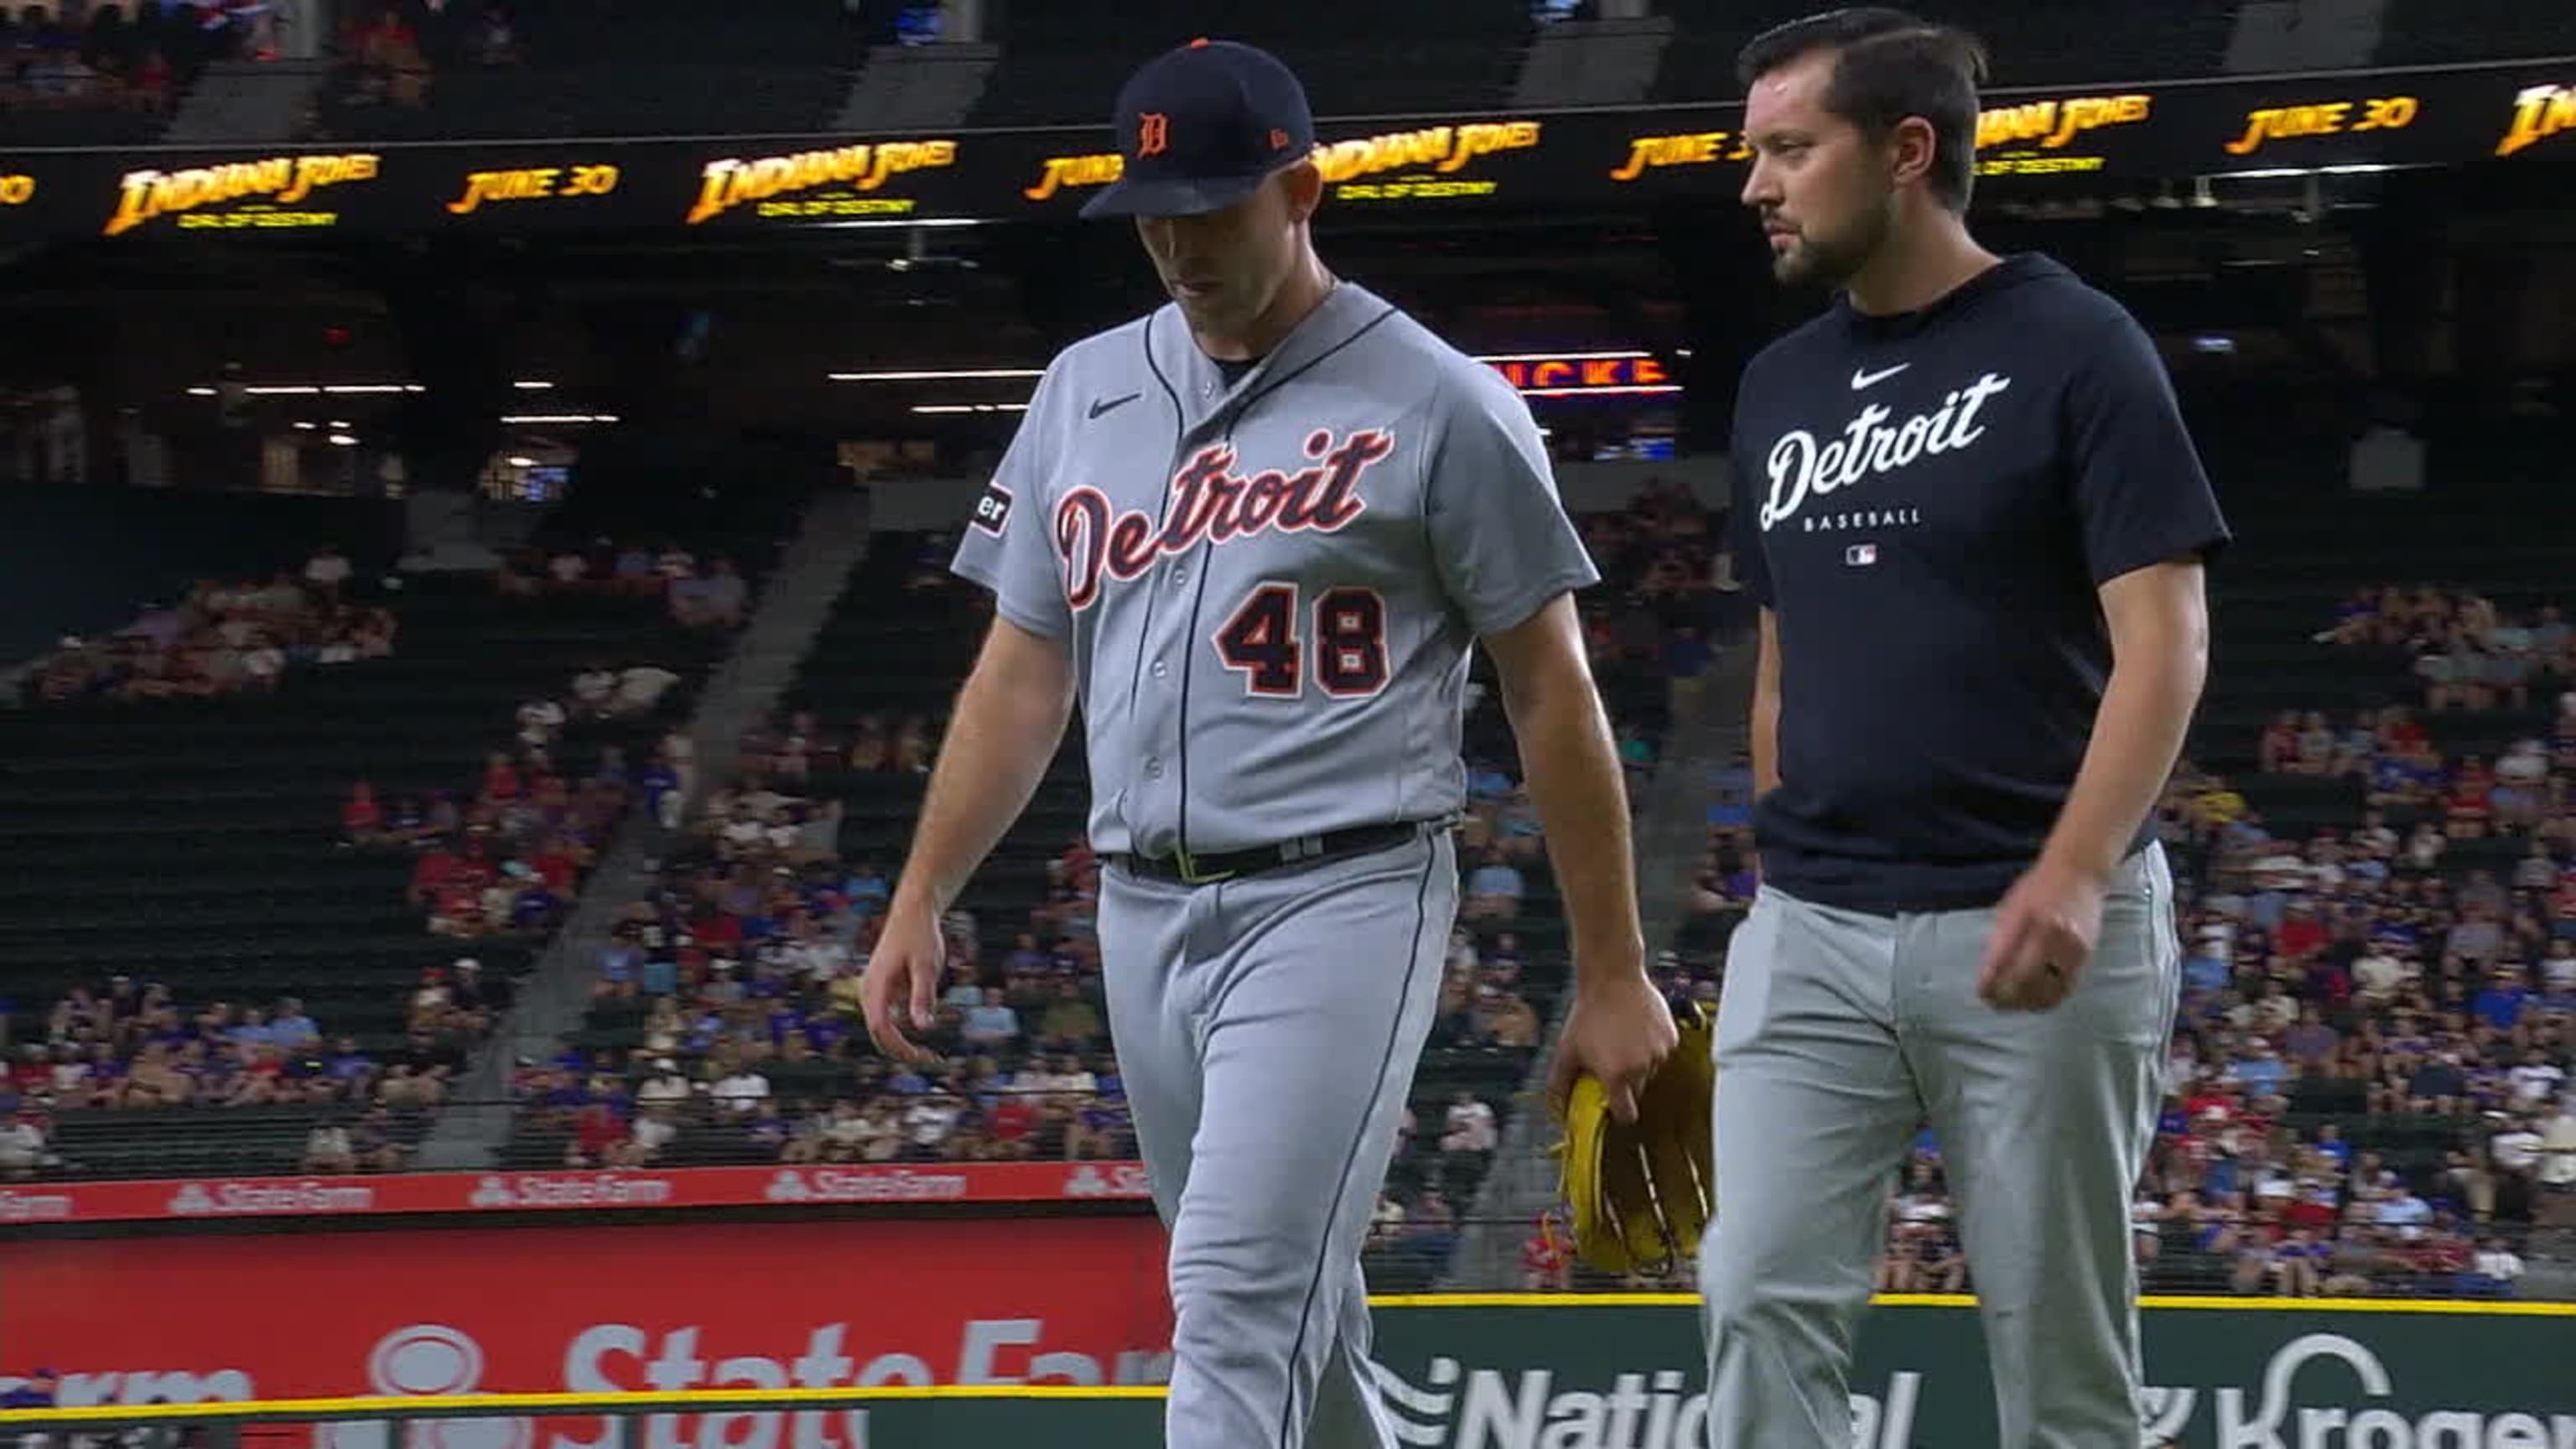 Tigers' prospect activated from injury list 15 months after